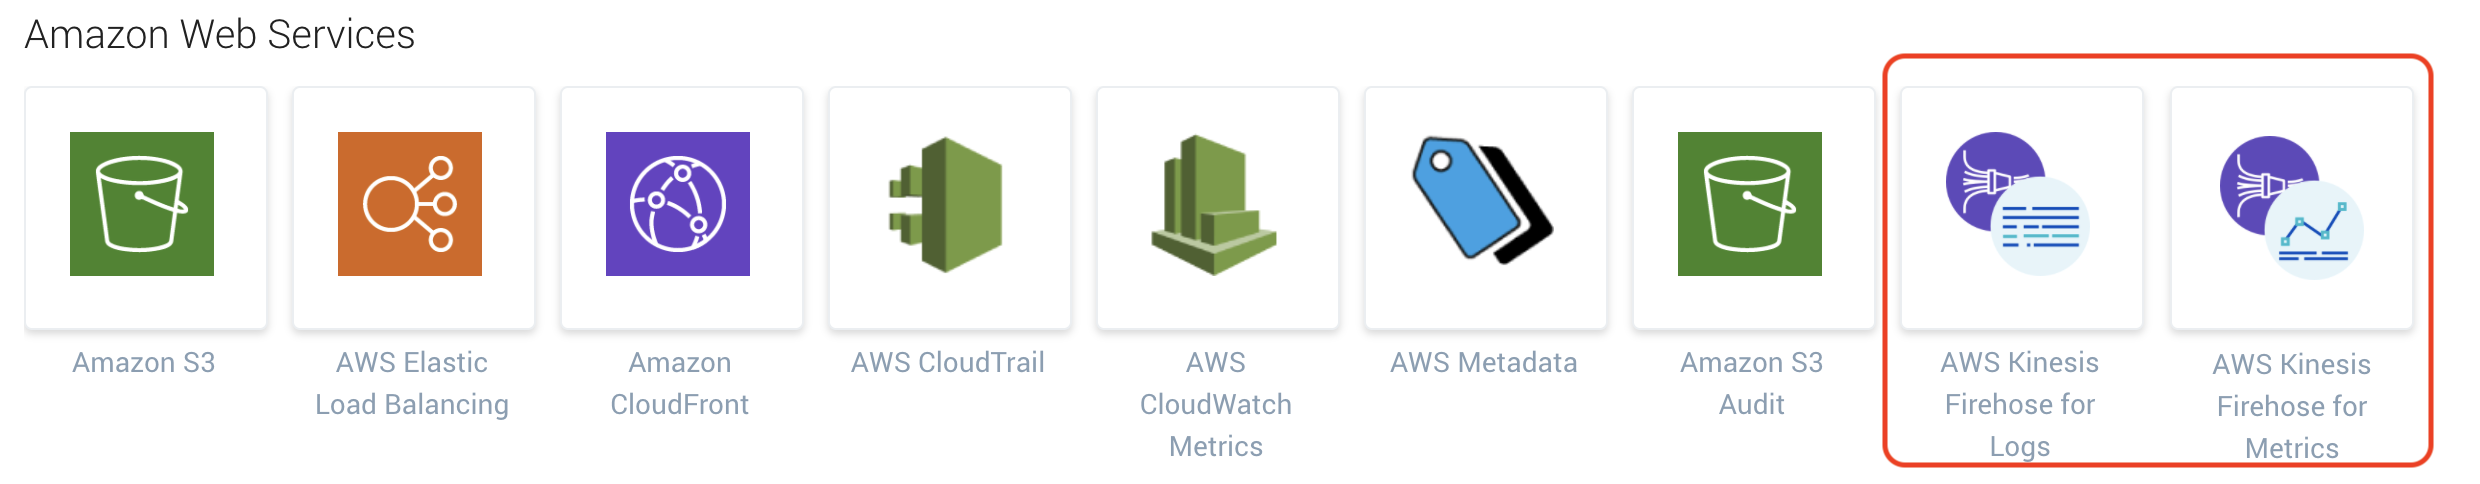 New AWS Kinesis Data Firehose integrations for streaming CloudWatch Logs and Metrics